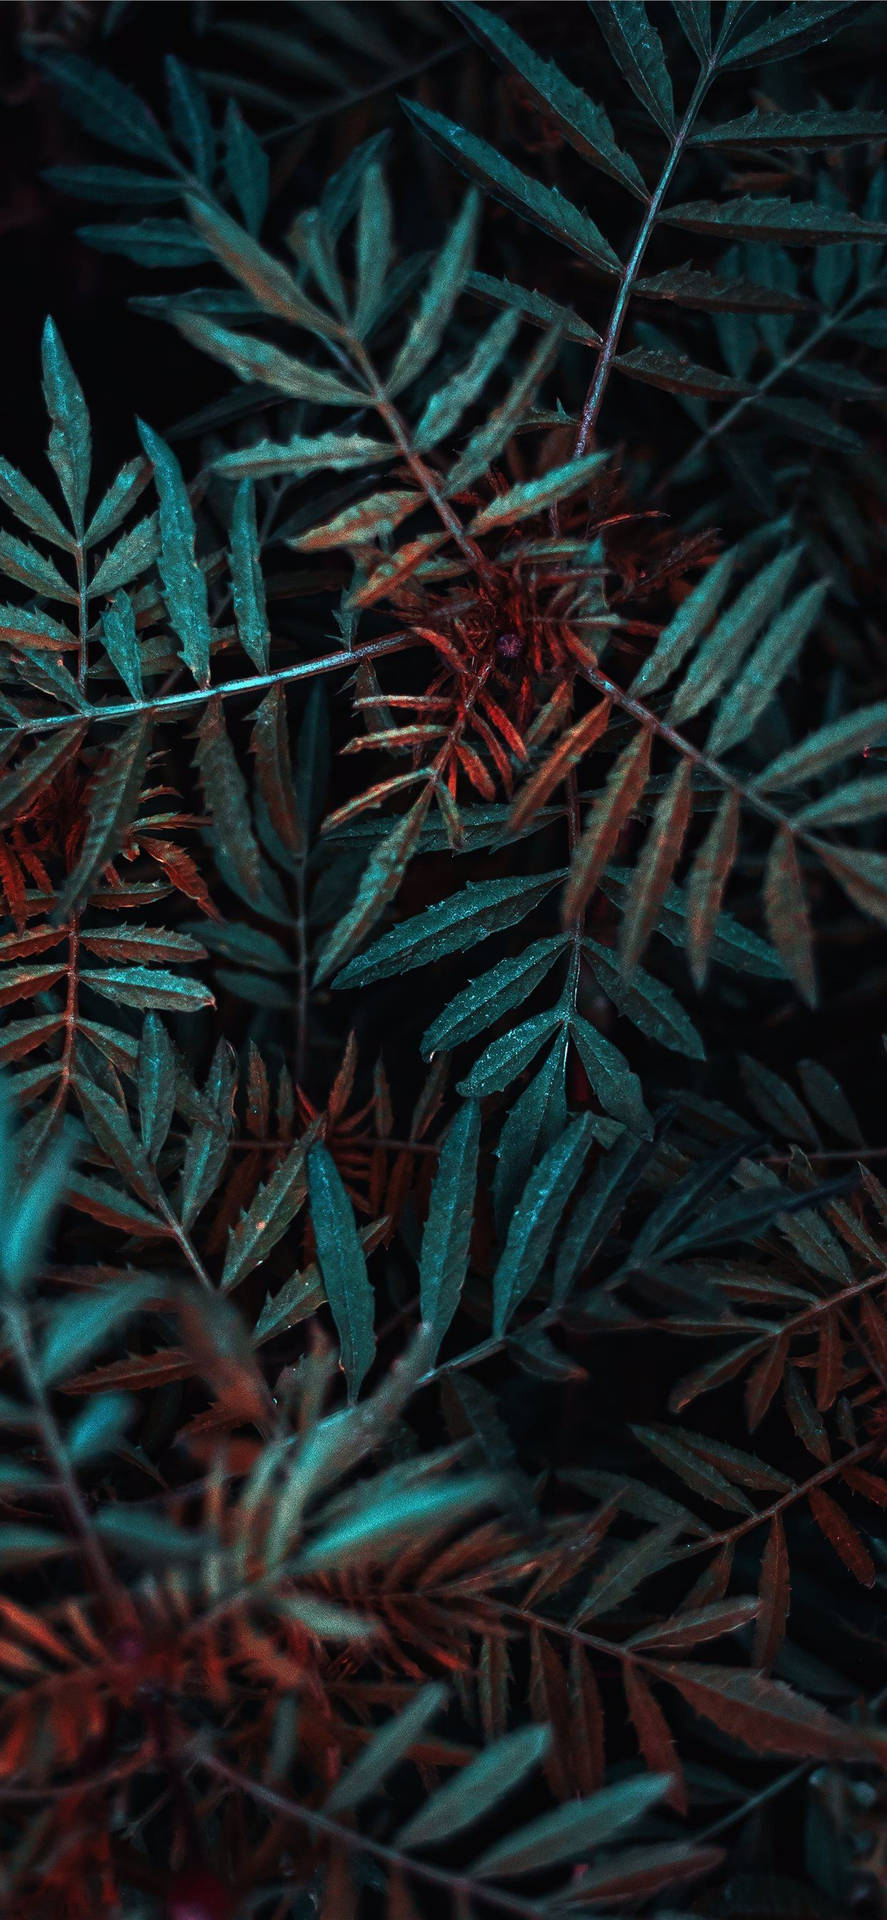 100+] Plant 4k Wallpapers | Wallpapers.com